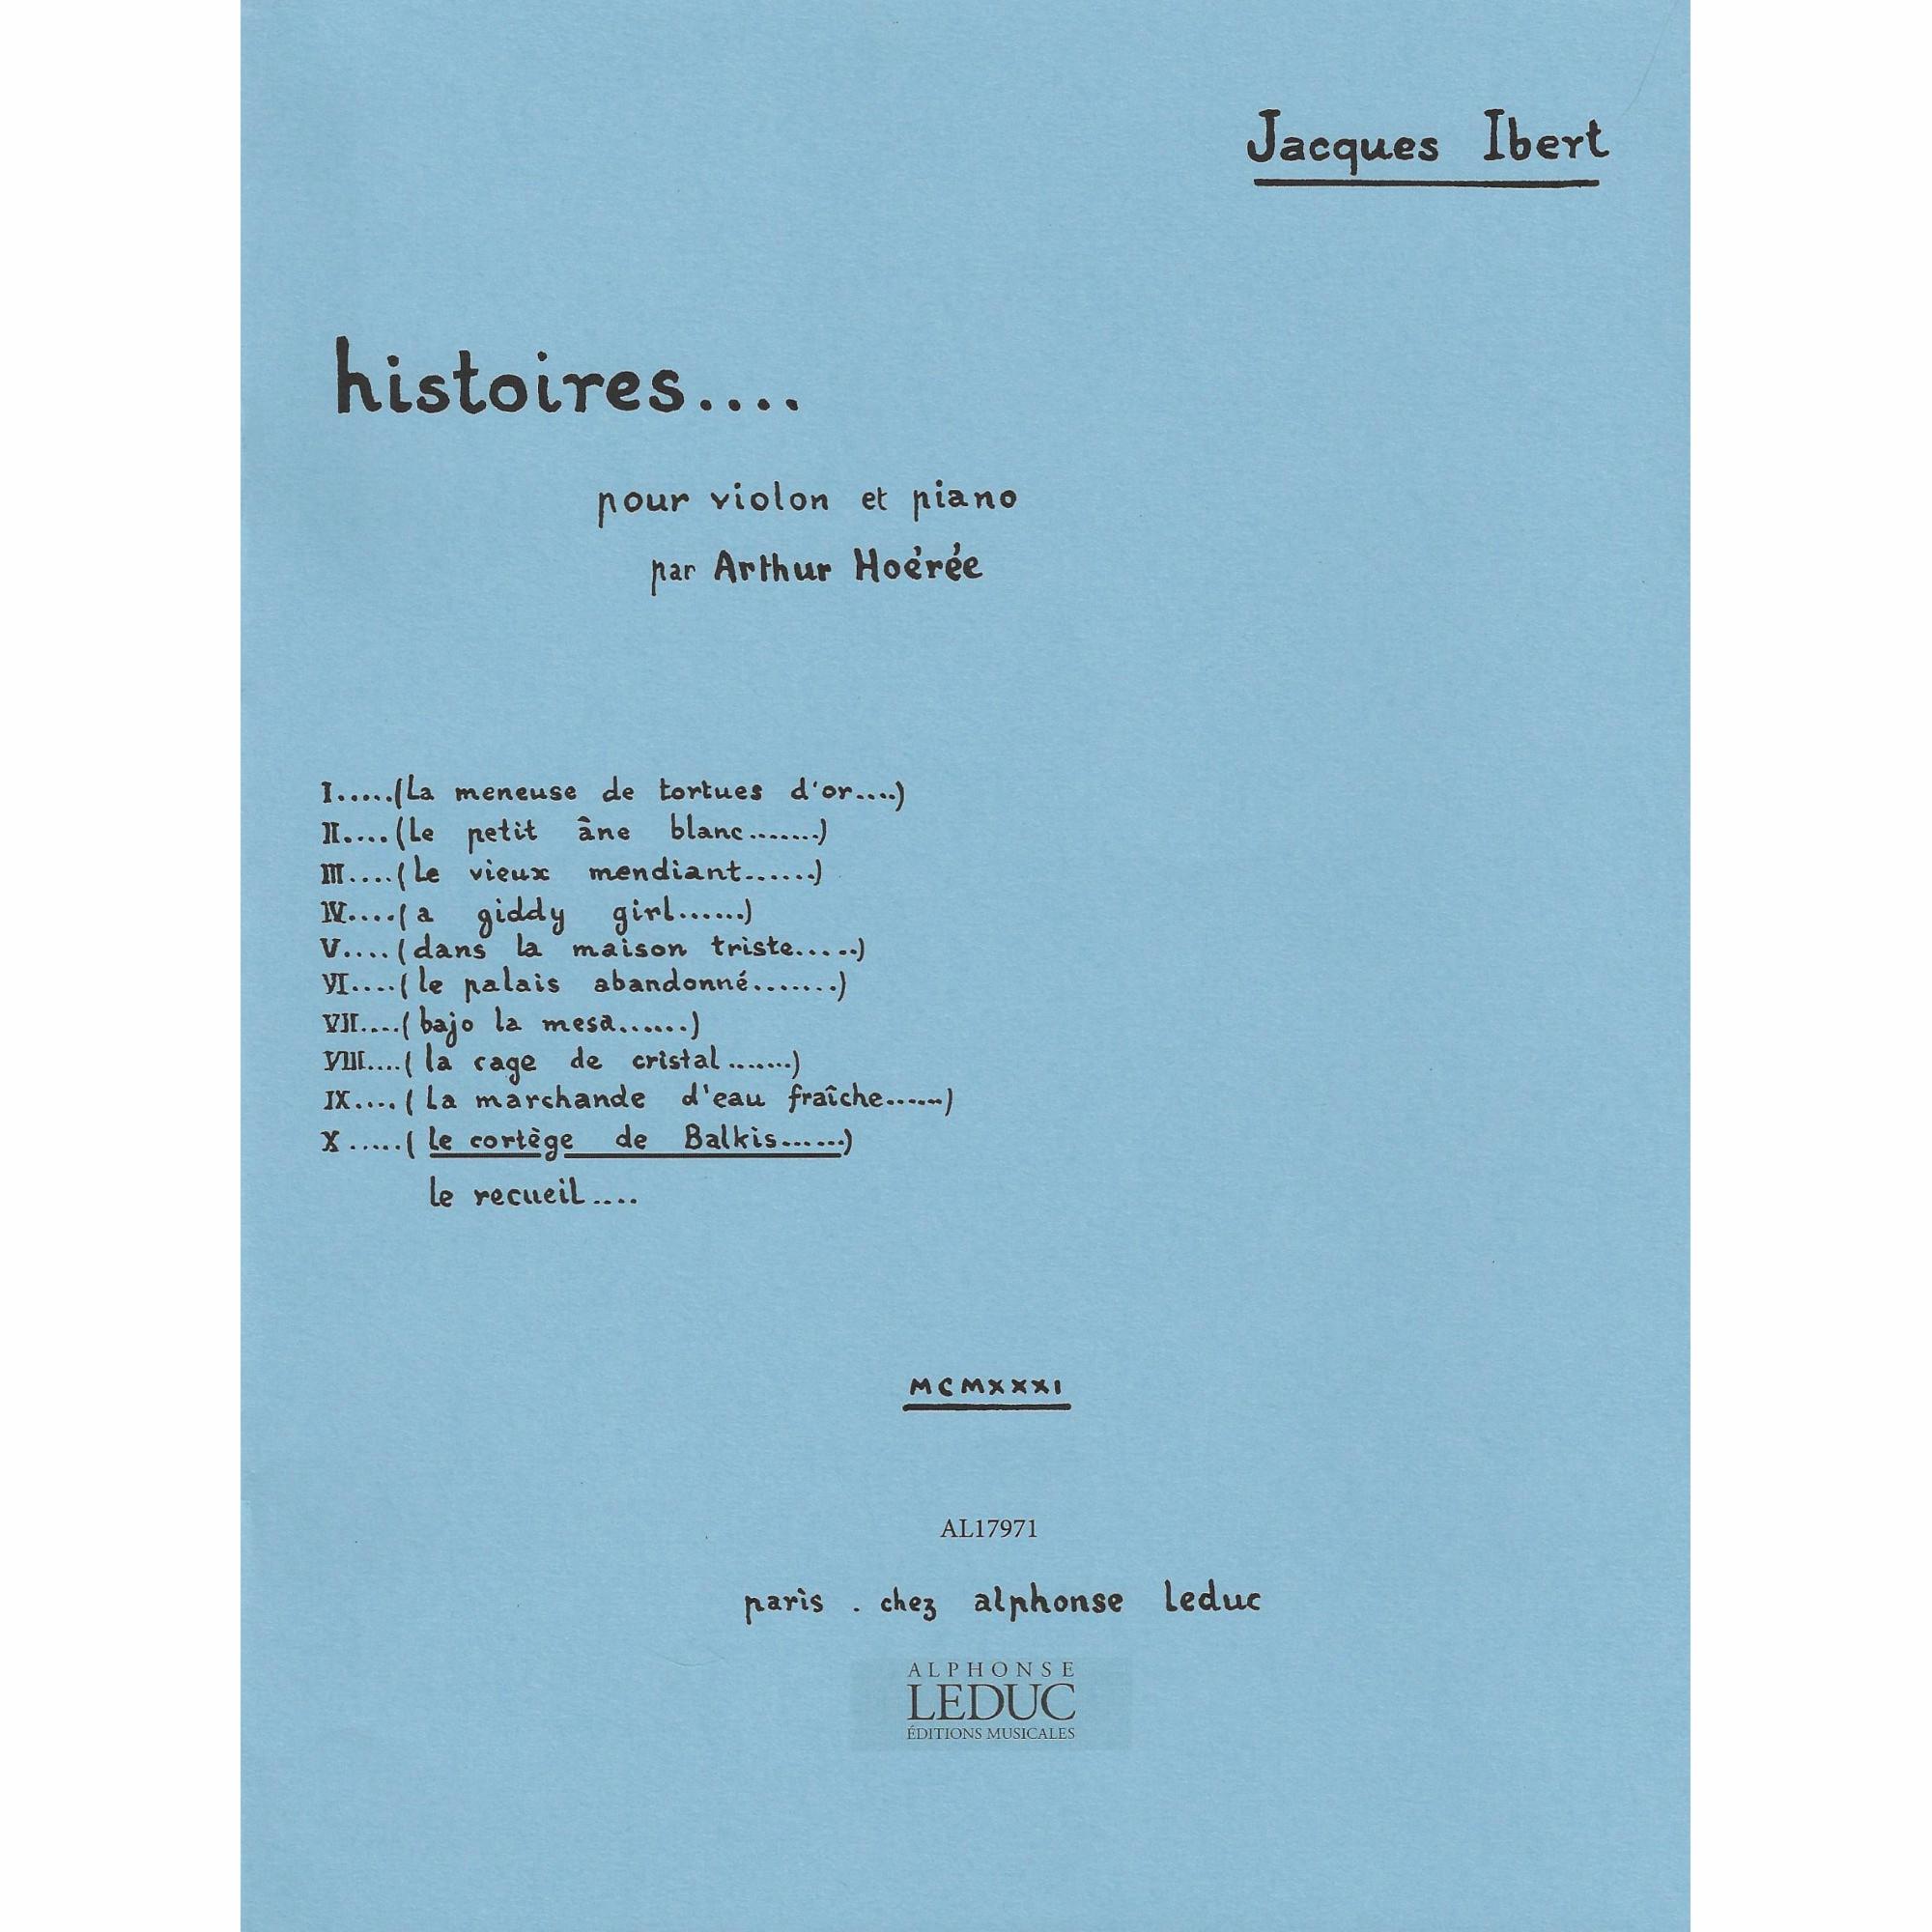 Ibert -- Le Cortege de Balkis, from Histoires for Violin and Piano